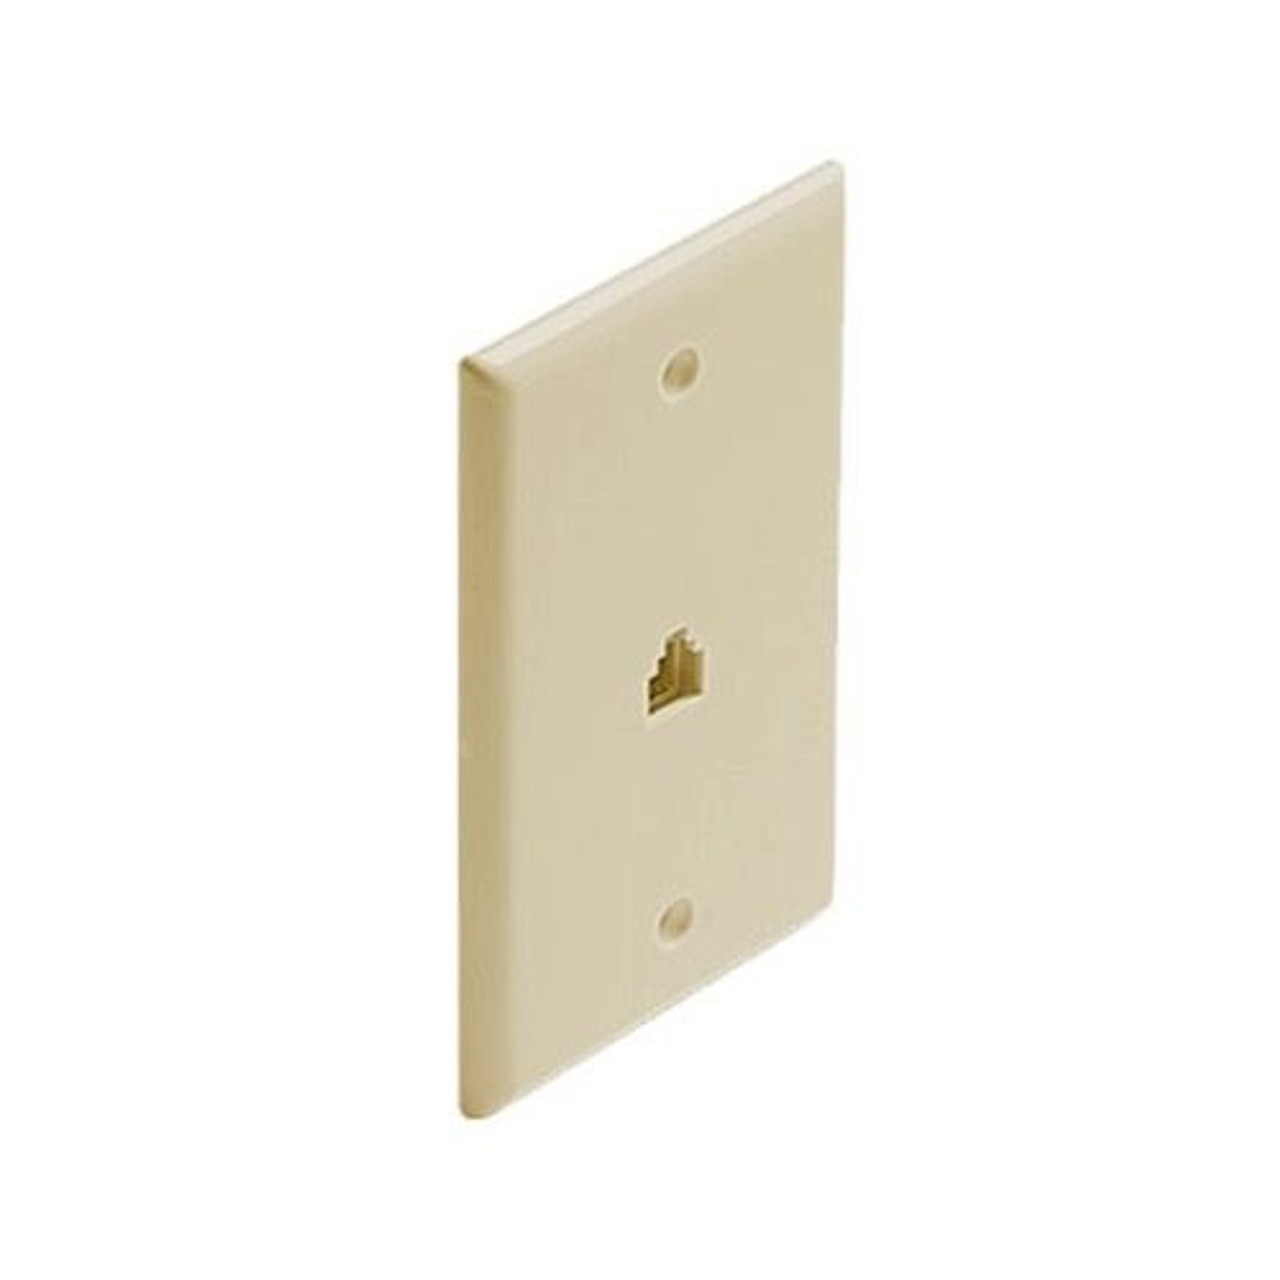 Steren 300-206IV 6-Conductor Smooth Finish Flush Wall Plate Ivory Phone 6P6C Faceplate RJ12 Jack Wall Plate Modular RJ-12 Conductor 1 Pack Modular Flush Mount Audio Data Line Signal, Part # 300206-IV